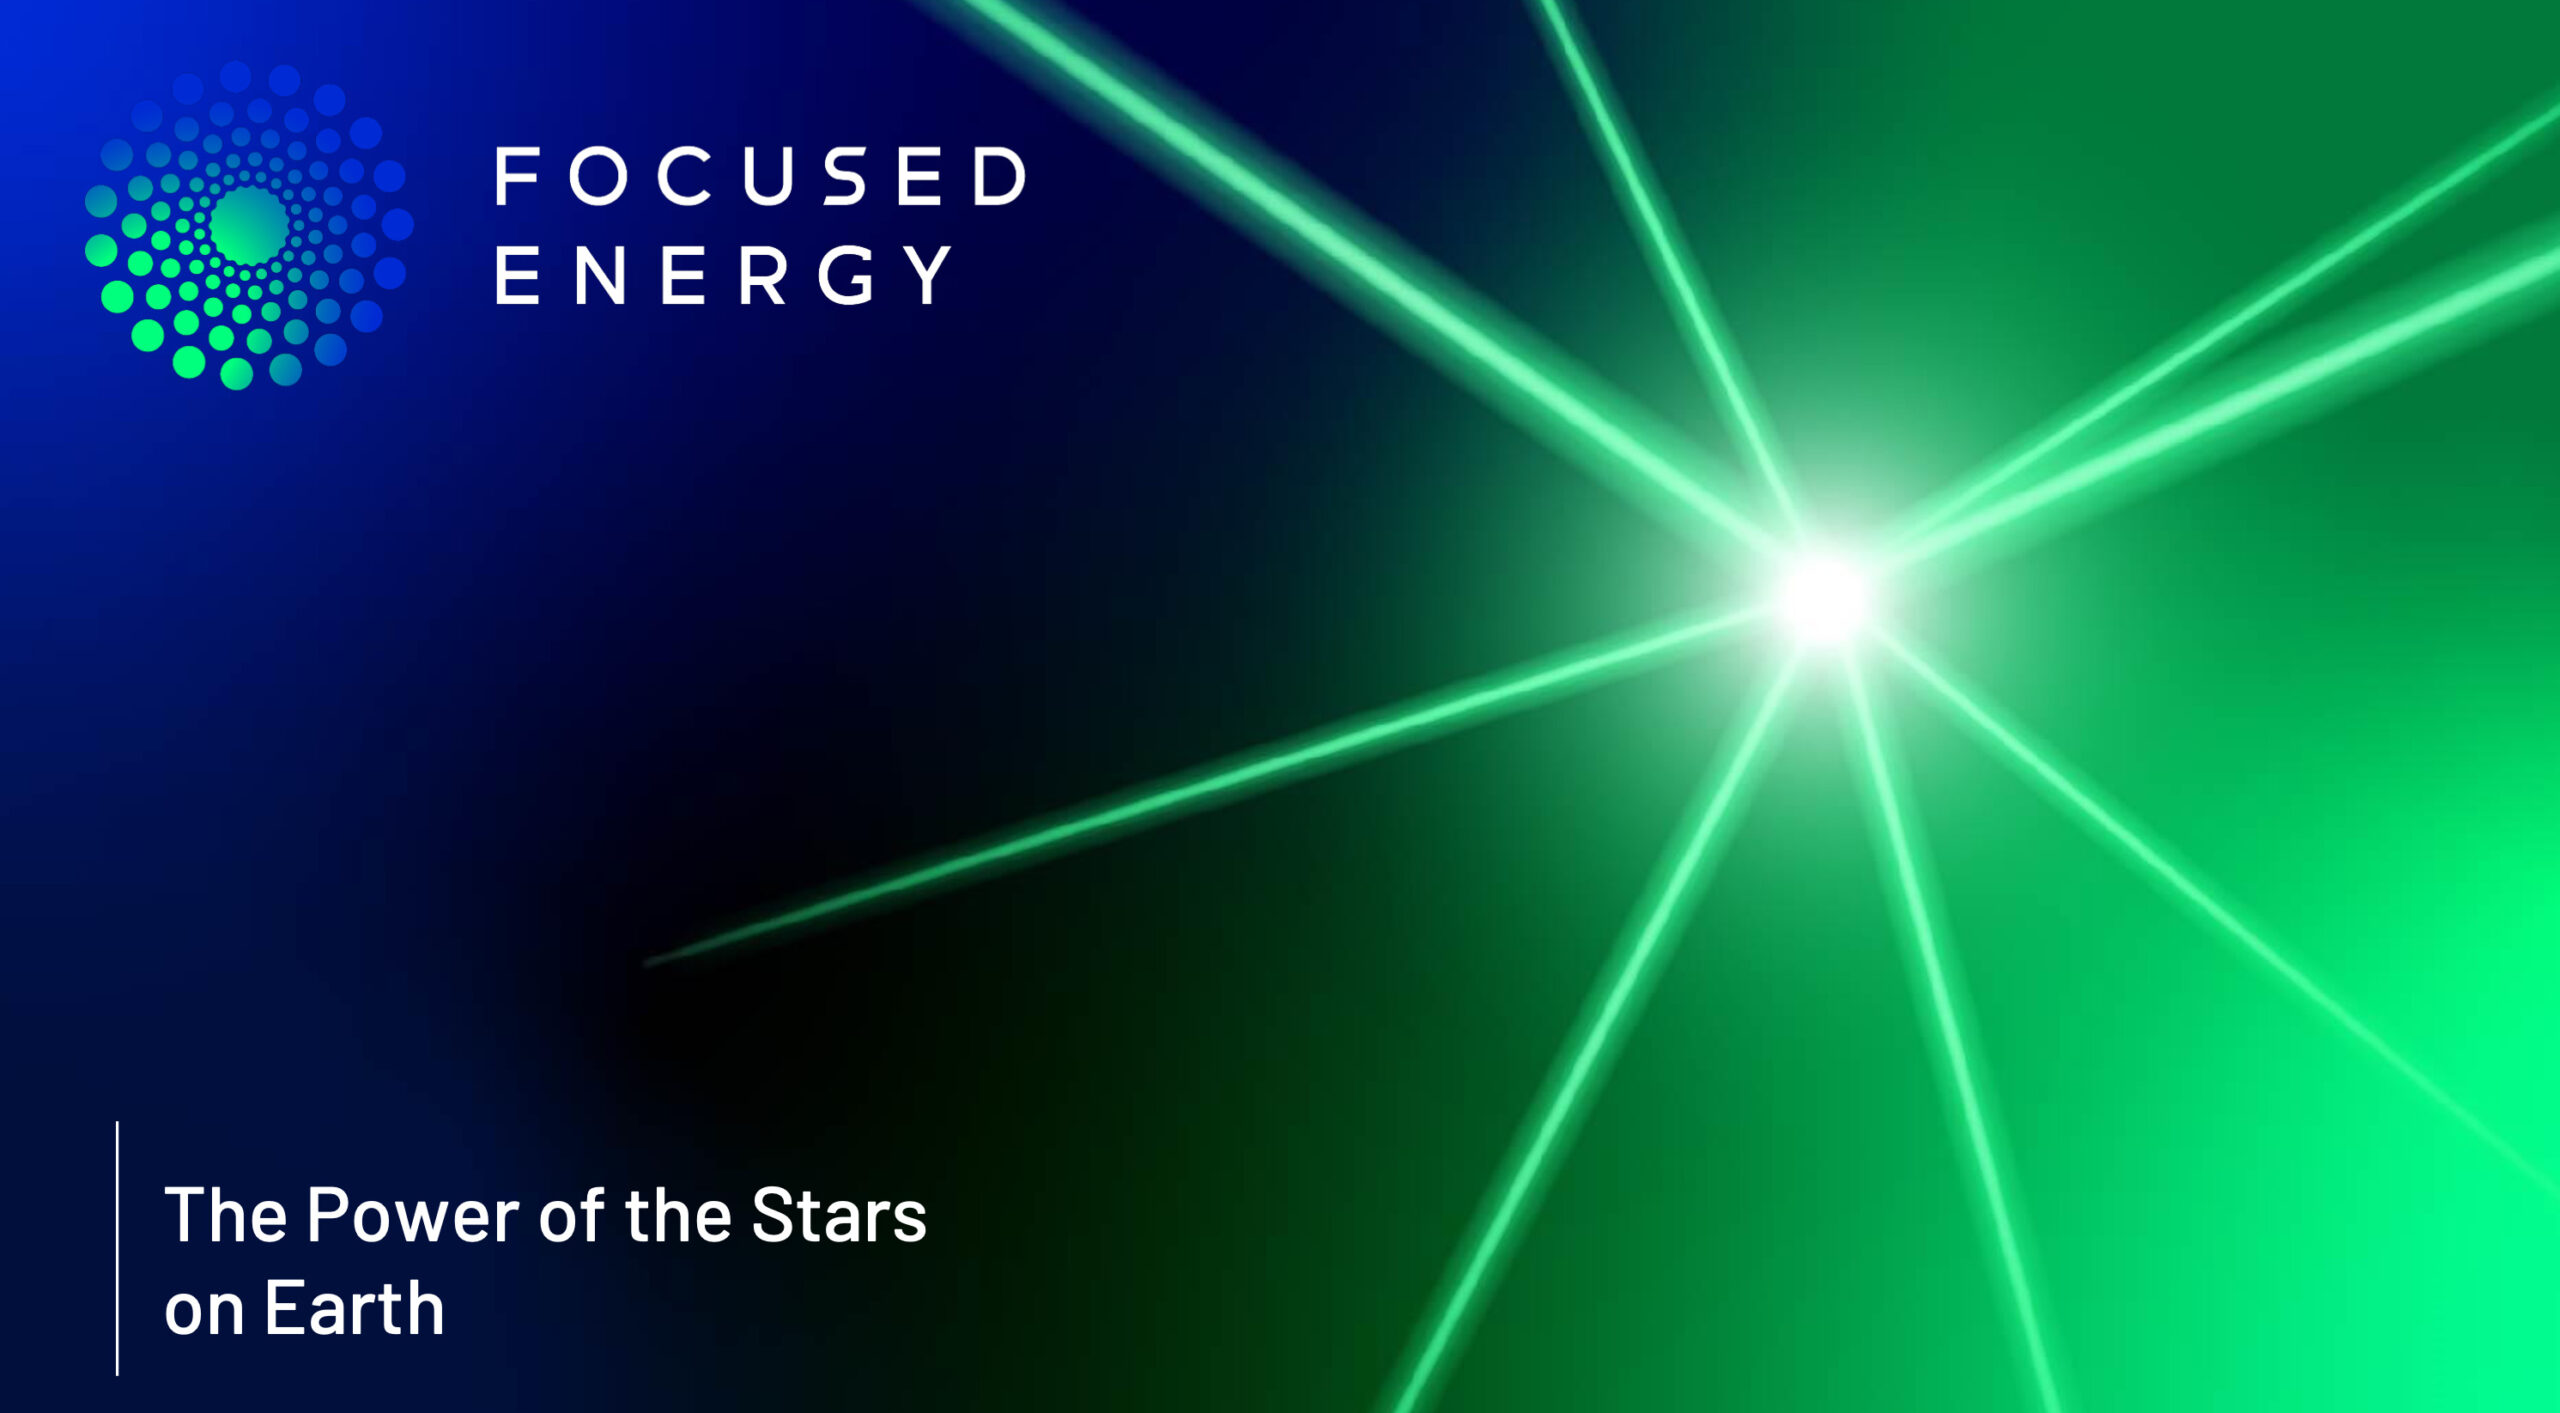 Focused Energy: Communication for the “Energy of the Future”